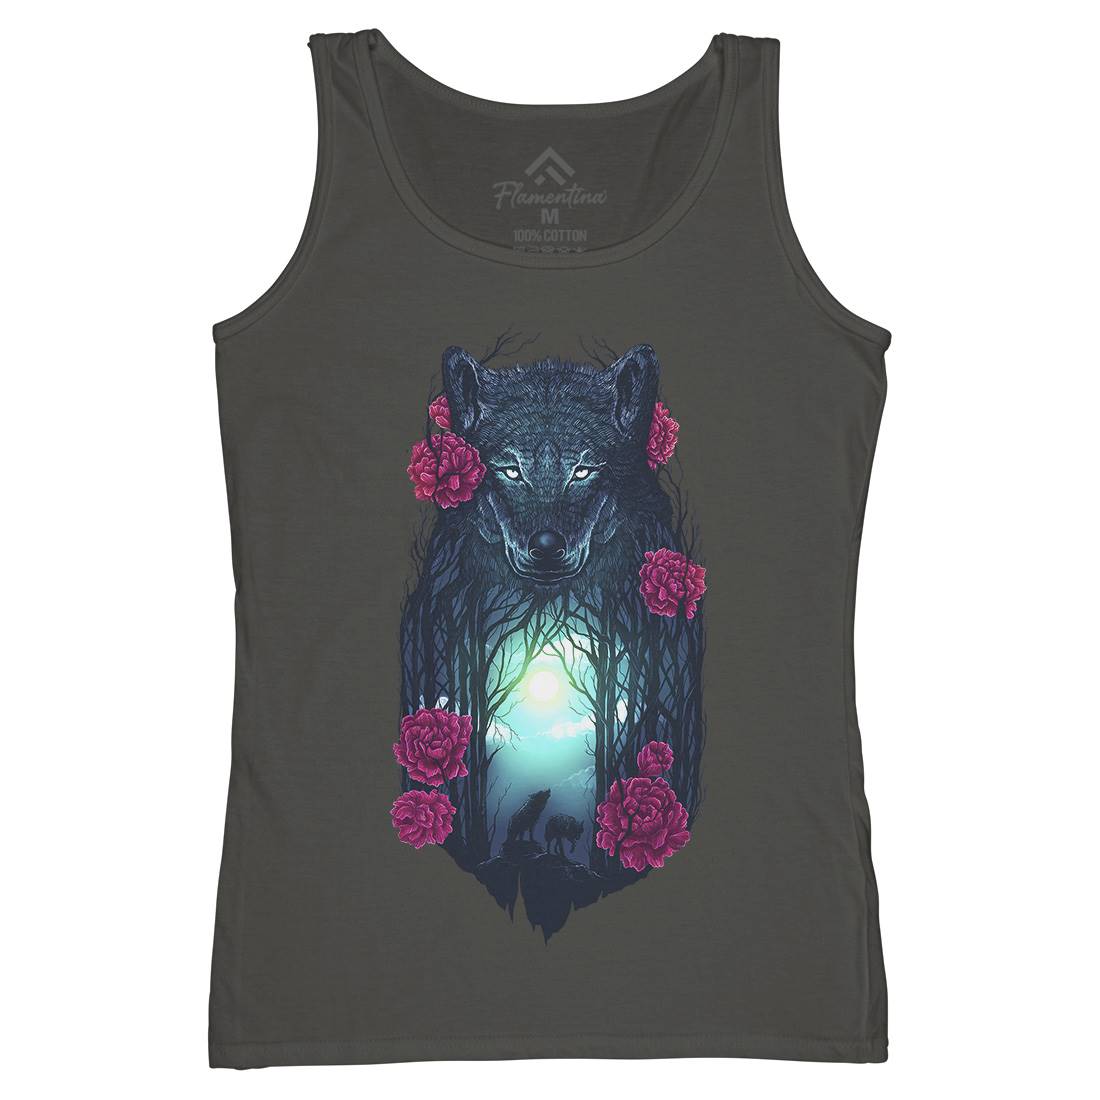 Running With The Wolves Womens Organic Tank Top Vest Animals D073